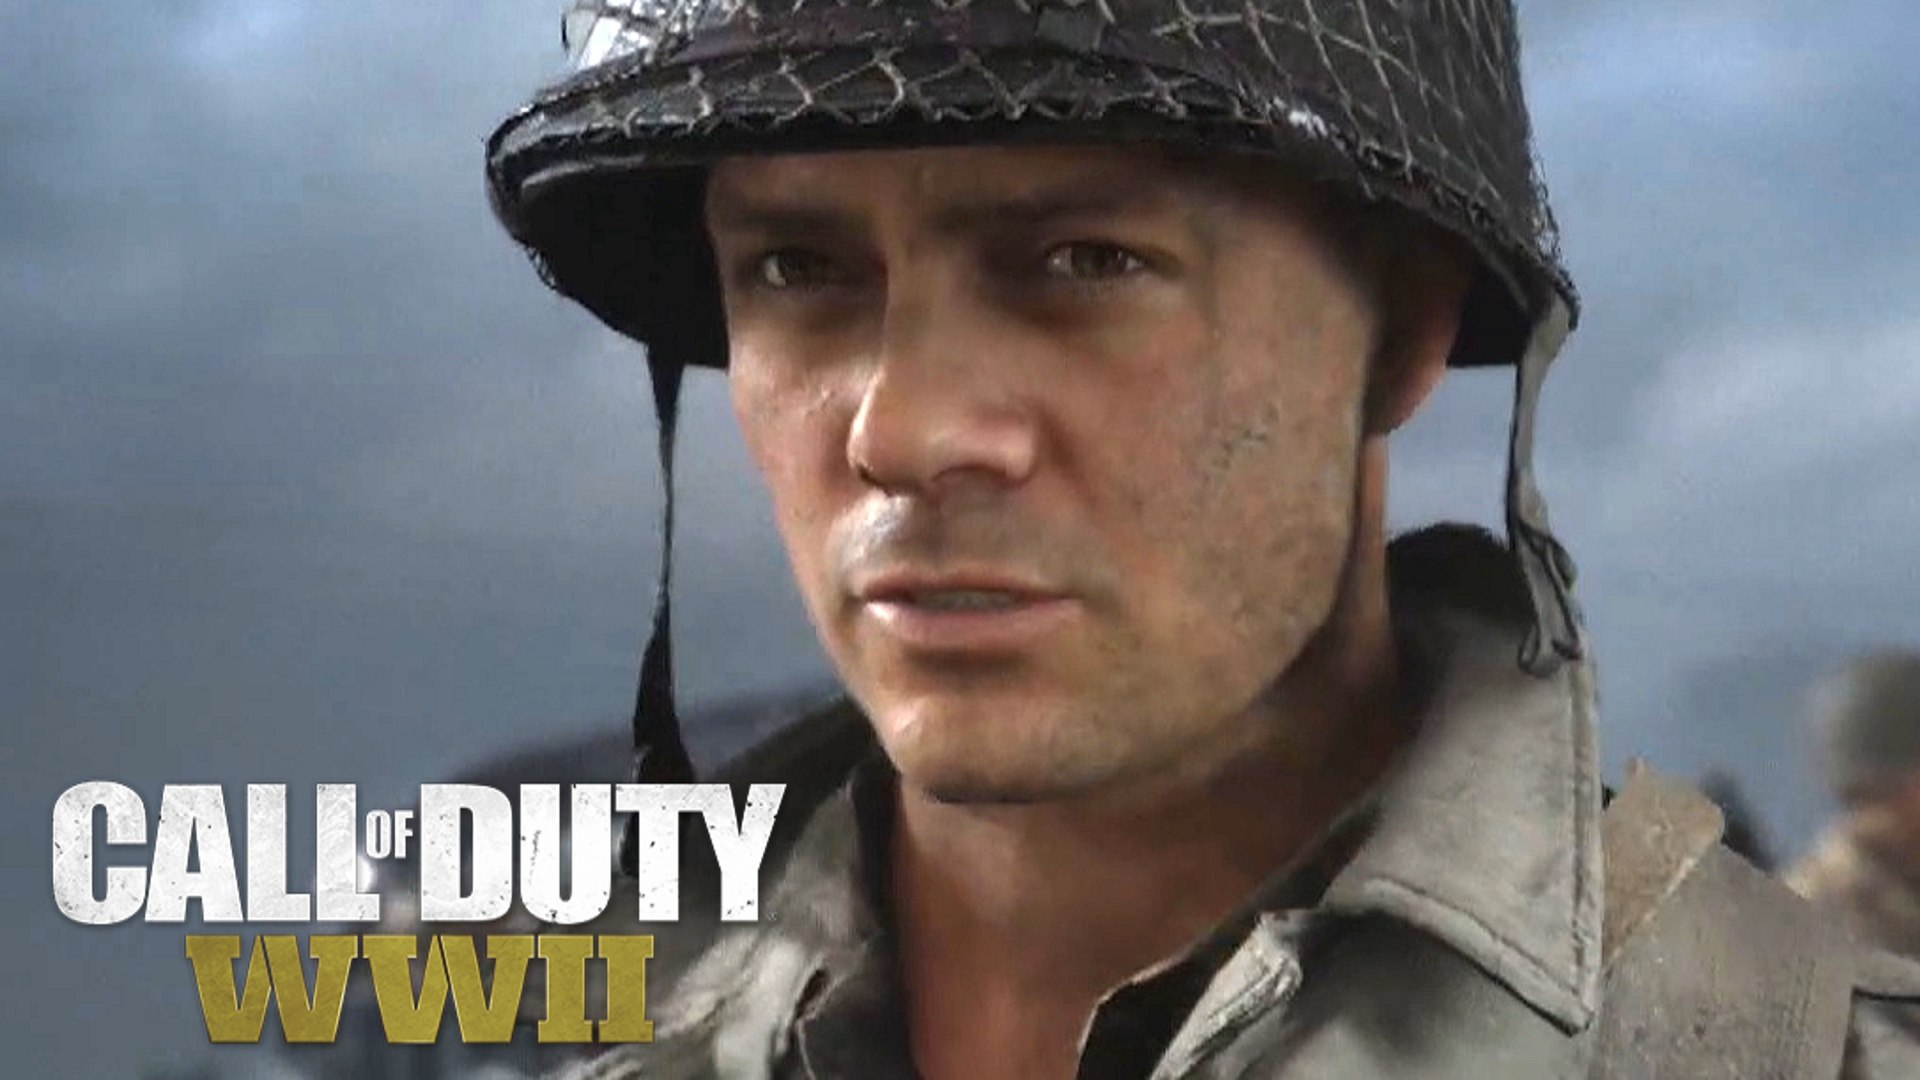 Call of Duty: WWII COD (PS4 Playstation 4) World War 2 - Campaign